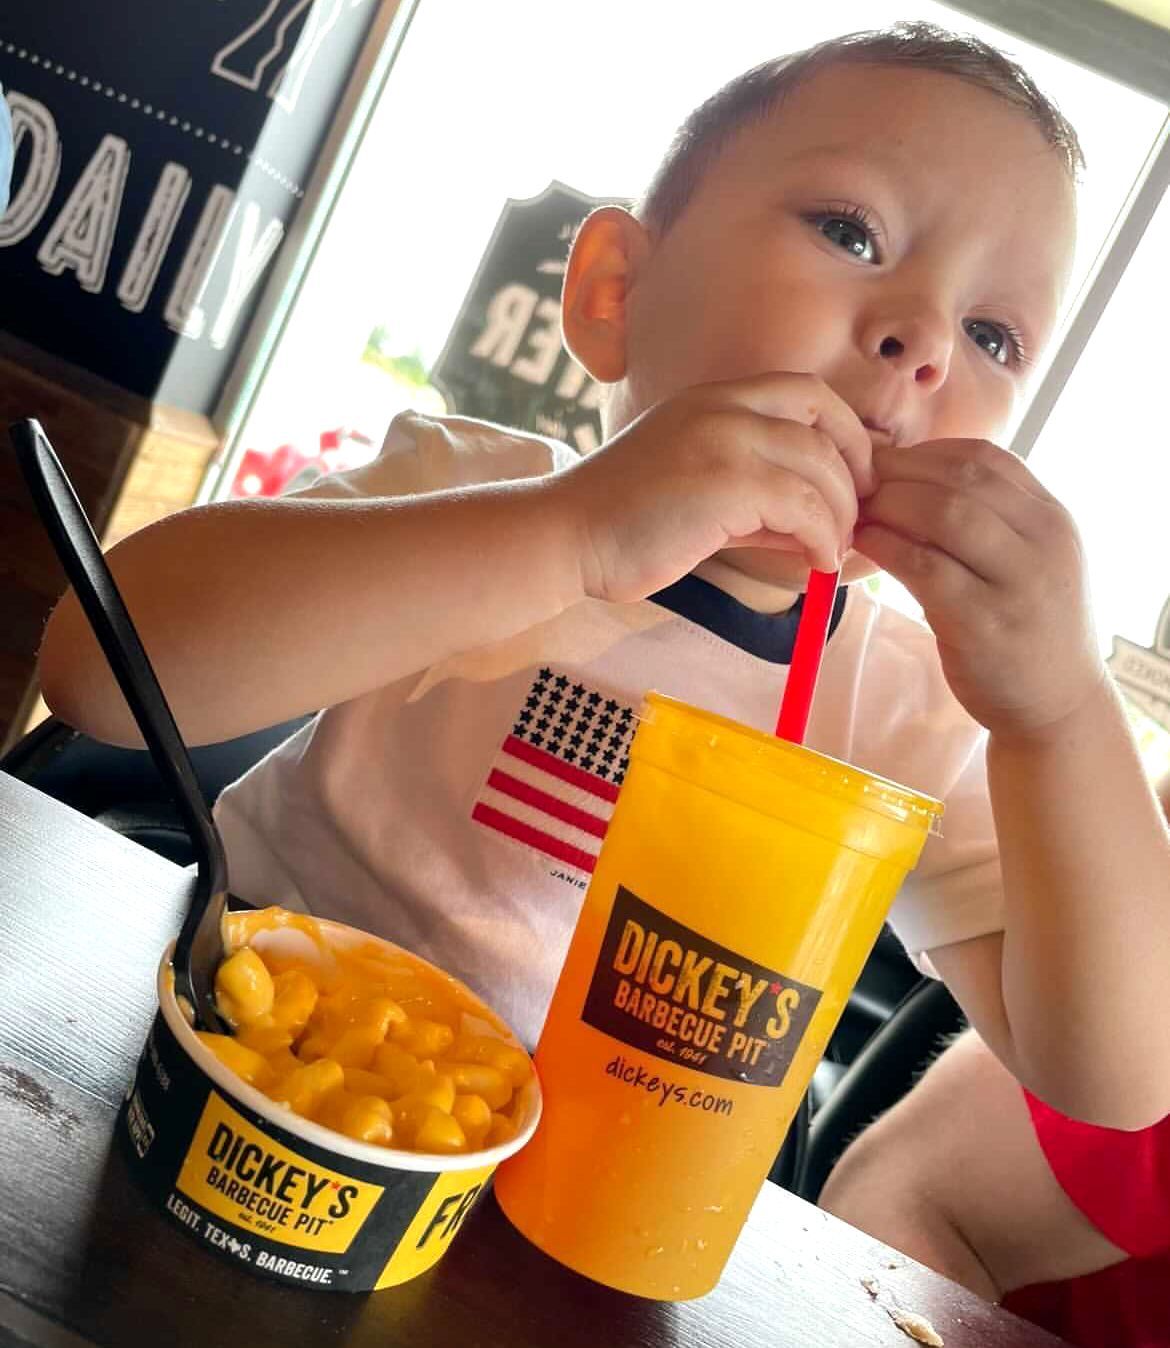 Have a Smokin’ Back to School Season with Dickey’s Legit. Texas. Barbecue.™  Texas-style barbecue restaurant celebrates back to school with Family Pack discount and Kids Eat Free Sunday deal